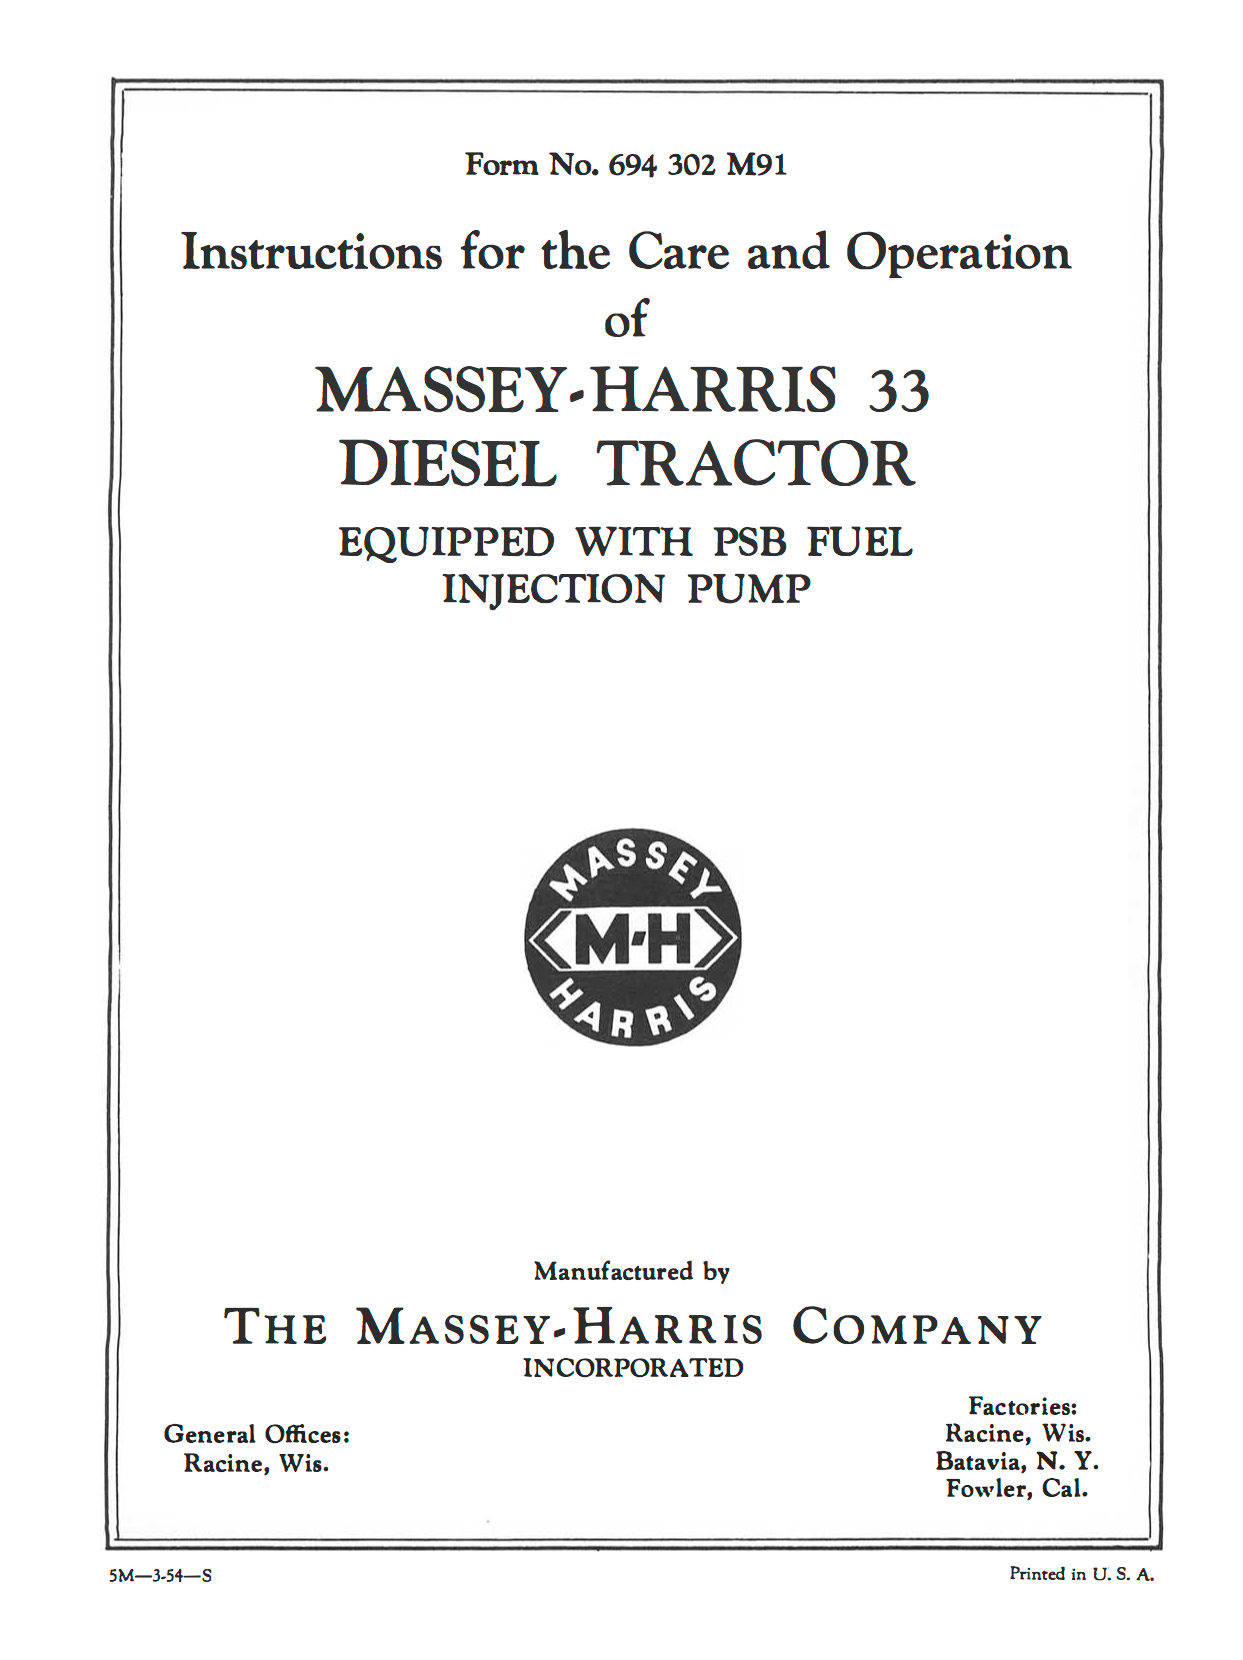 Massey Harris 33 Diesel Tractors Instructions for Care and Operation